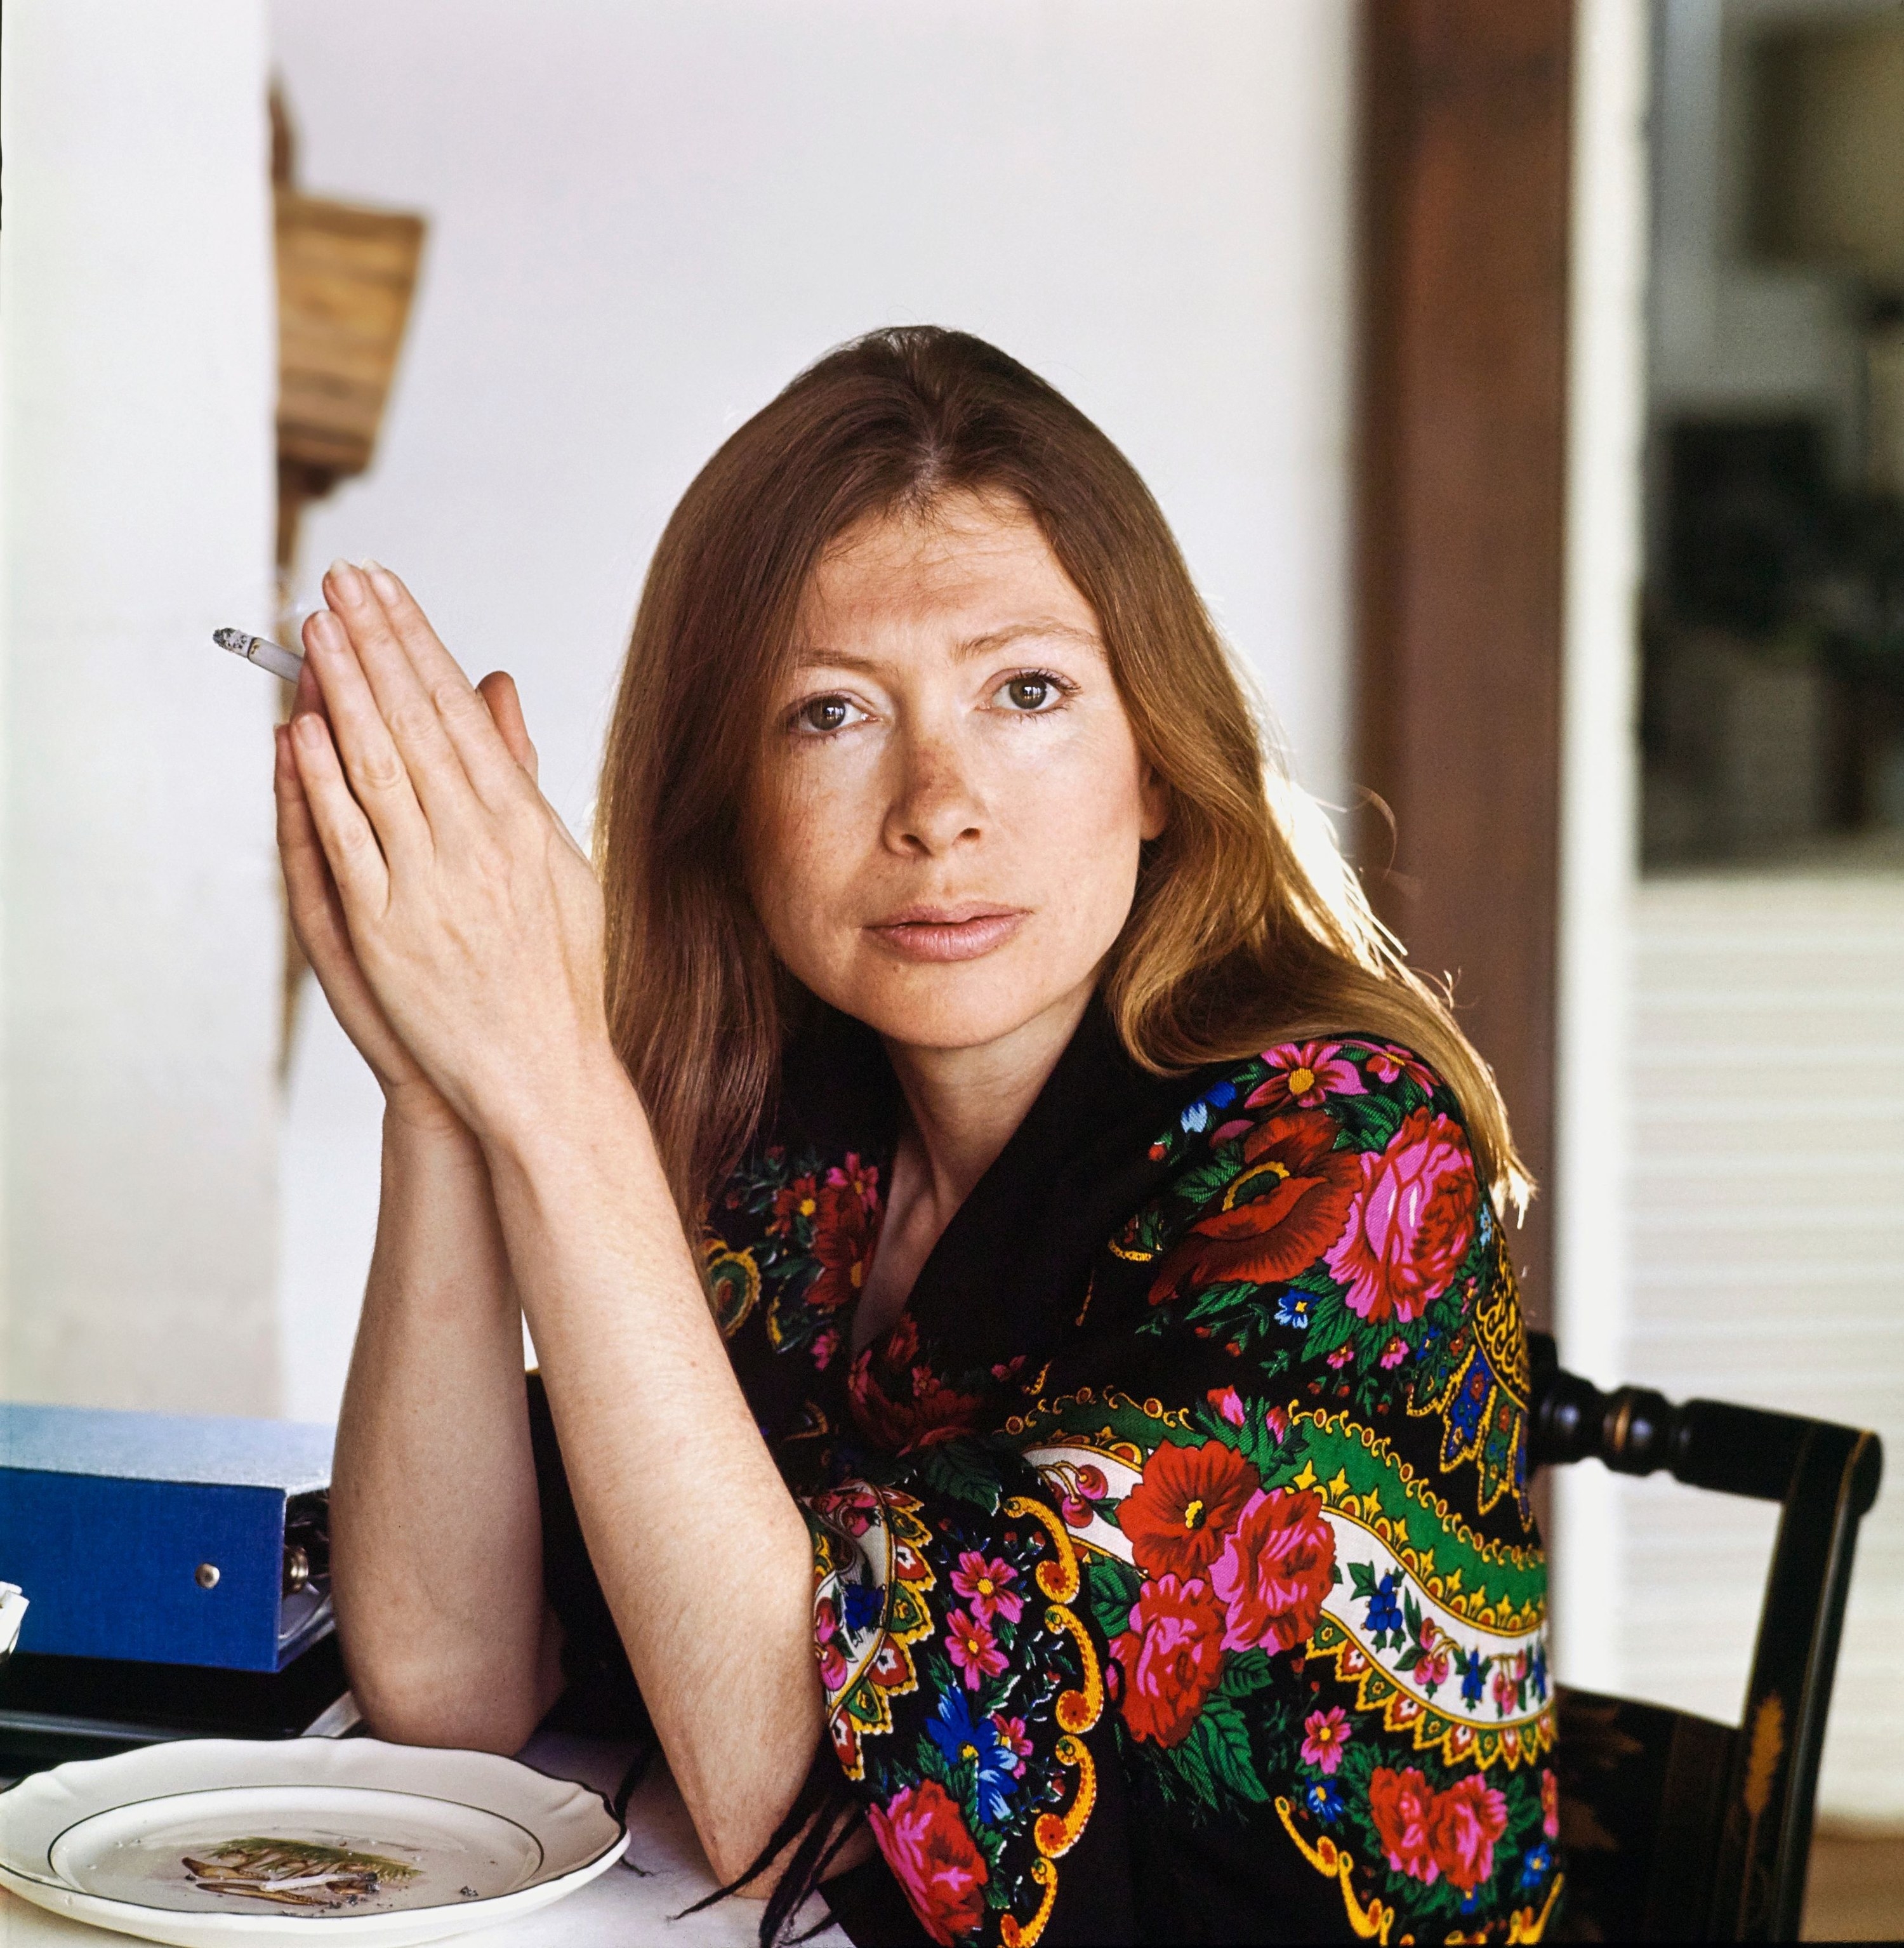 Joan Didion in a robe sitting at a table with her hands pressed together